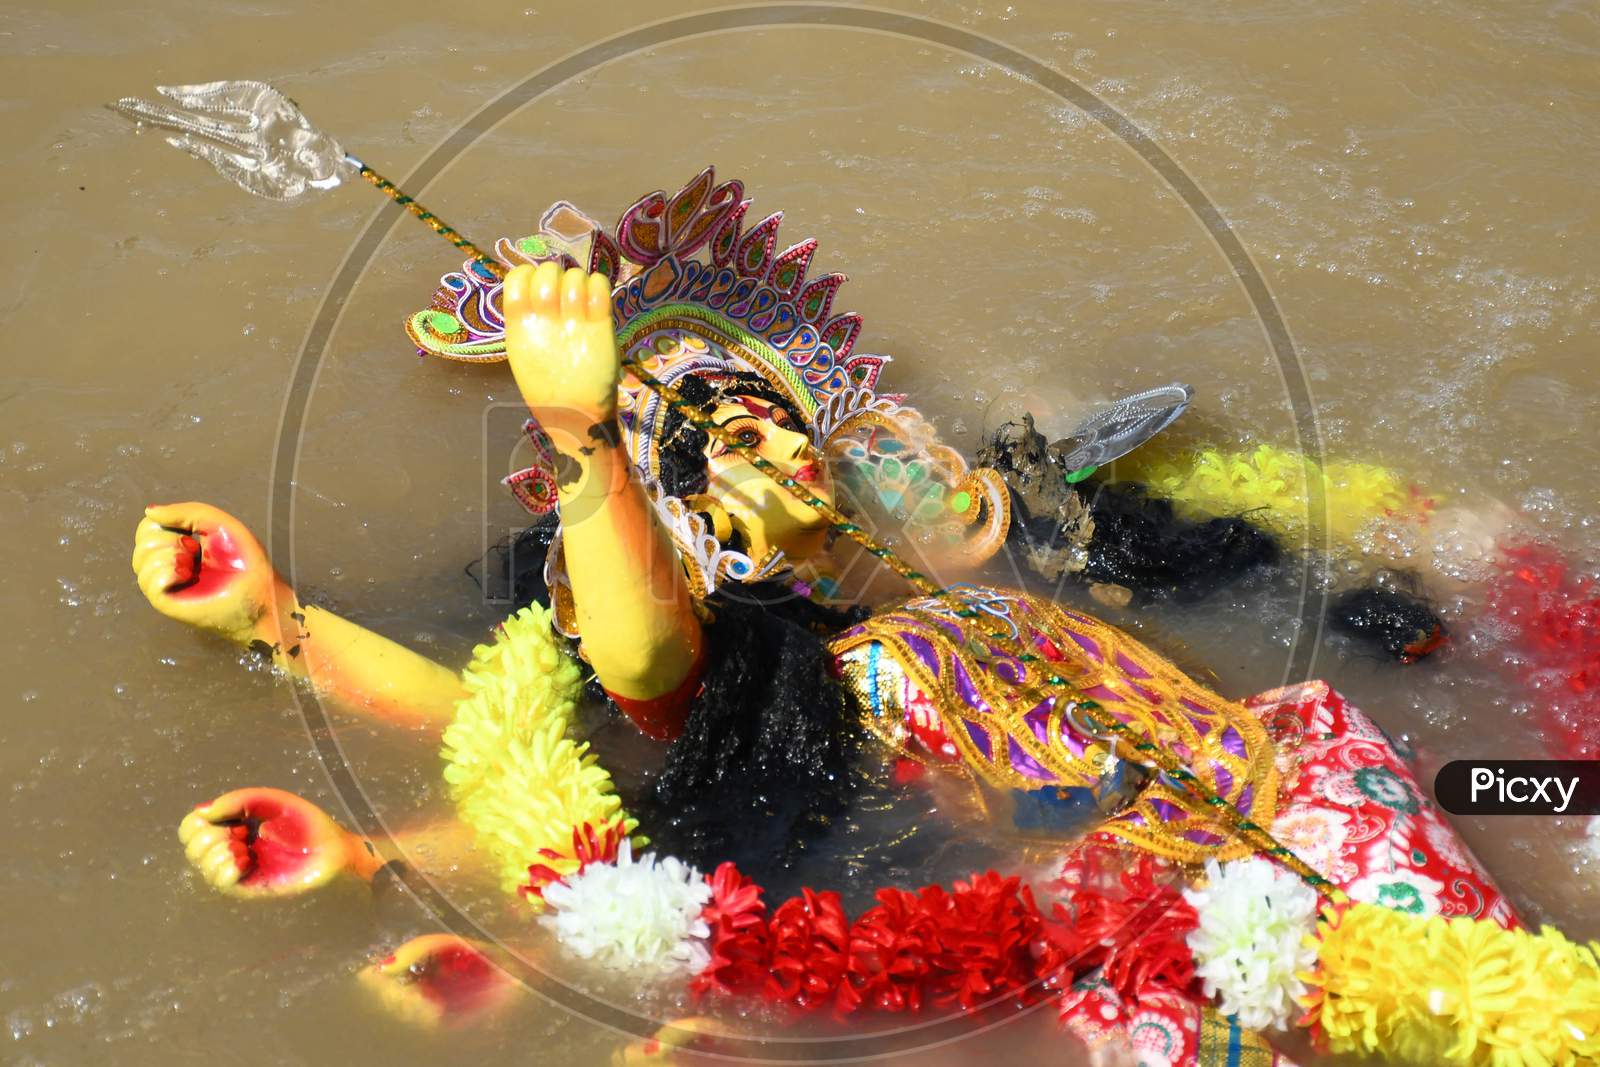 Hindu goddess Durga into the brahmaputra  river during the immersion ceremony of Durga Puja in Guwahati on oct 26,2020